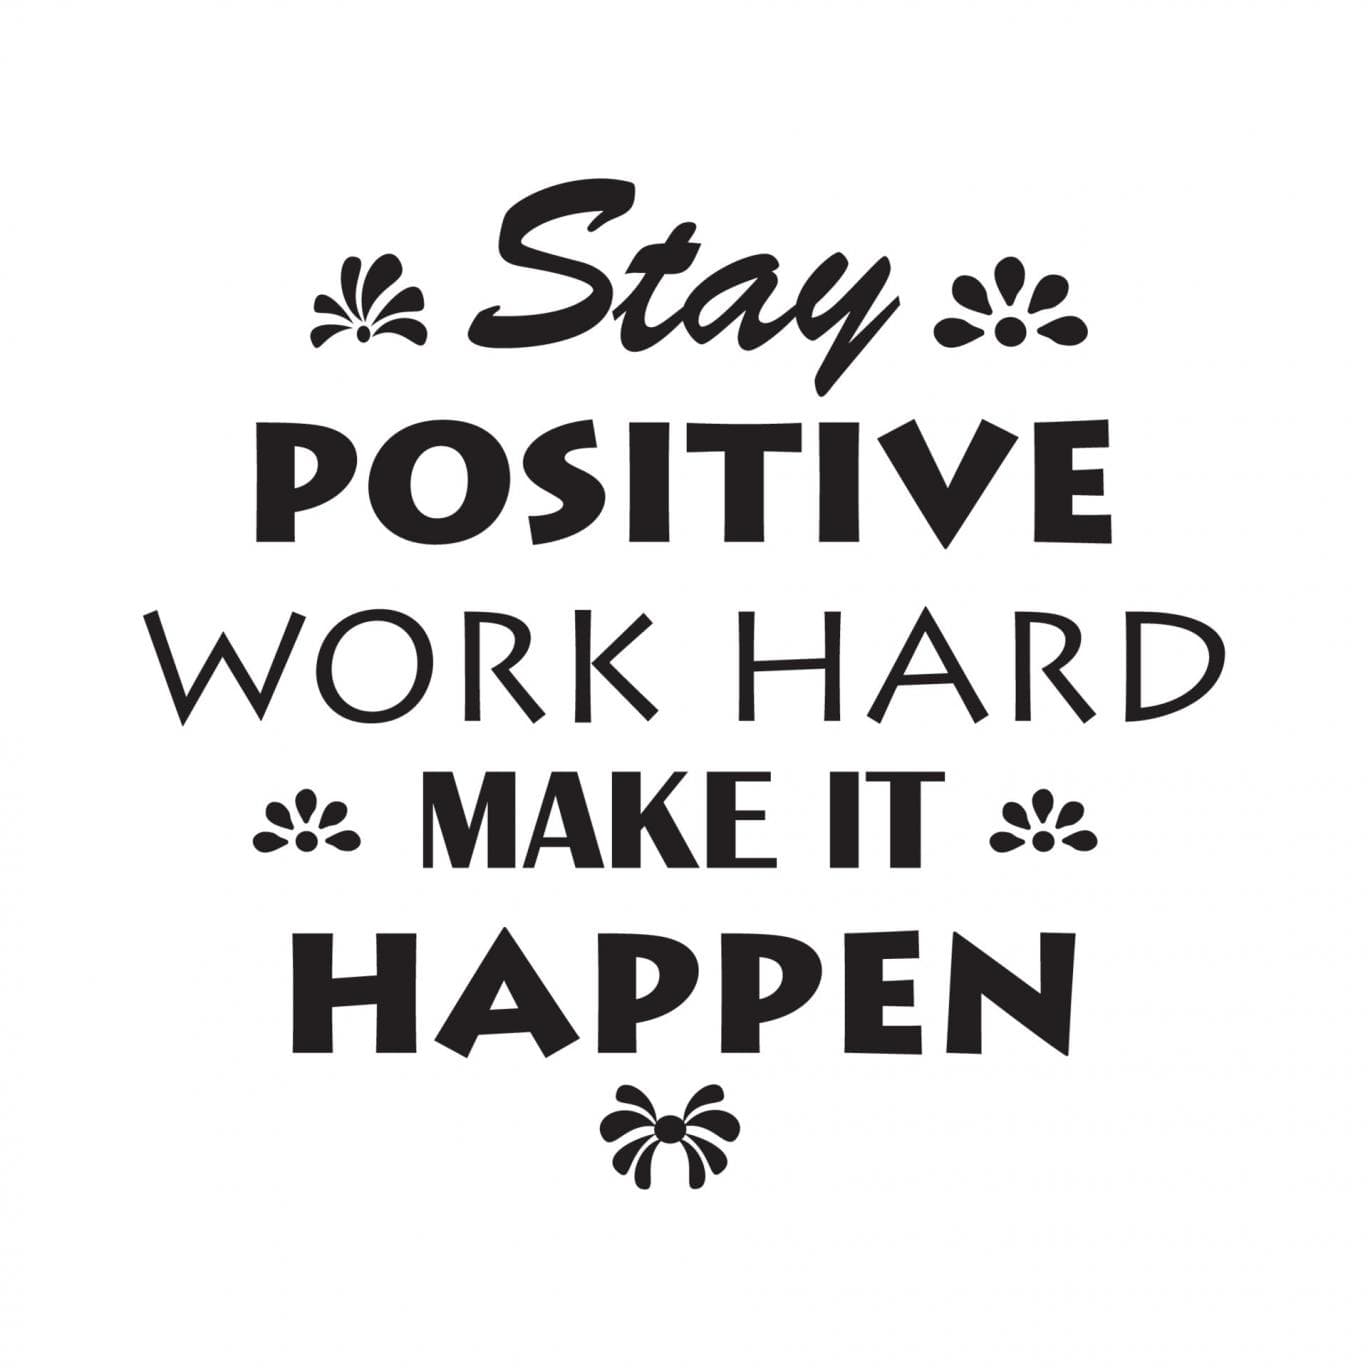 stay positive work hard make it happen quotes vecor design free vector